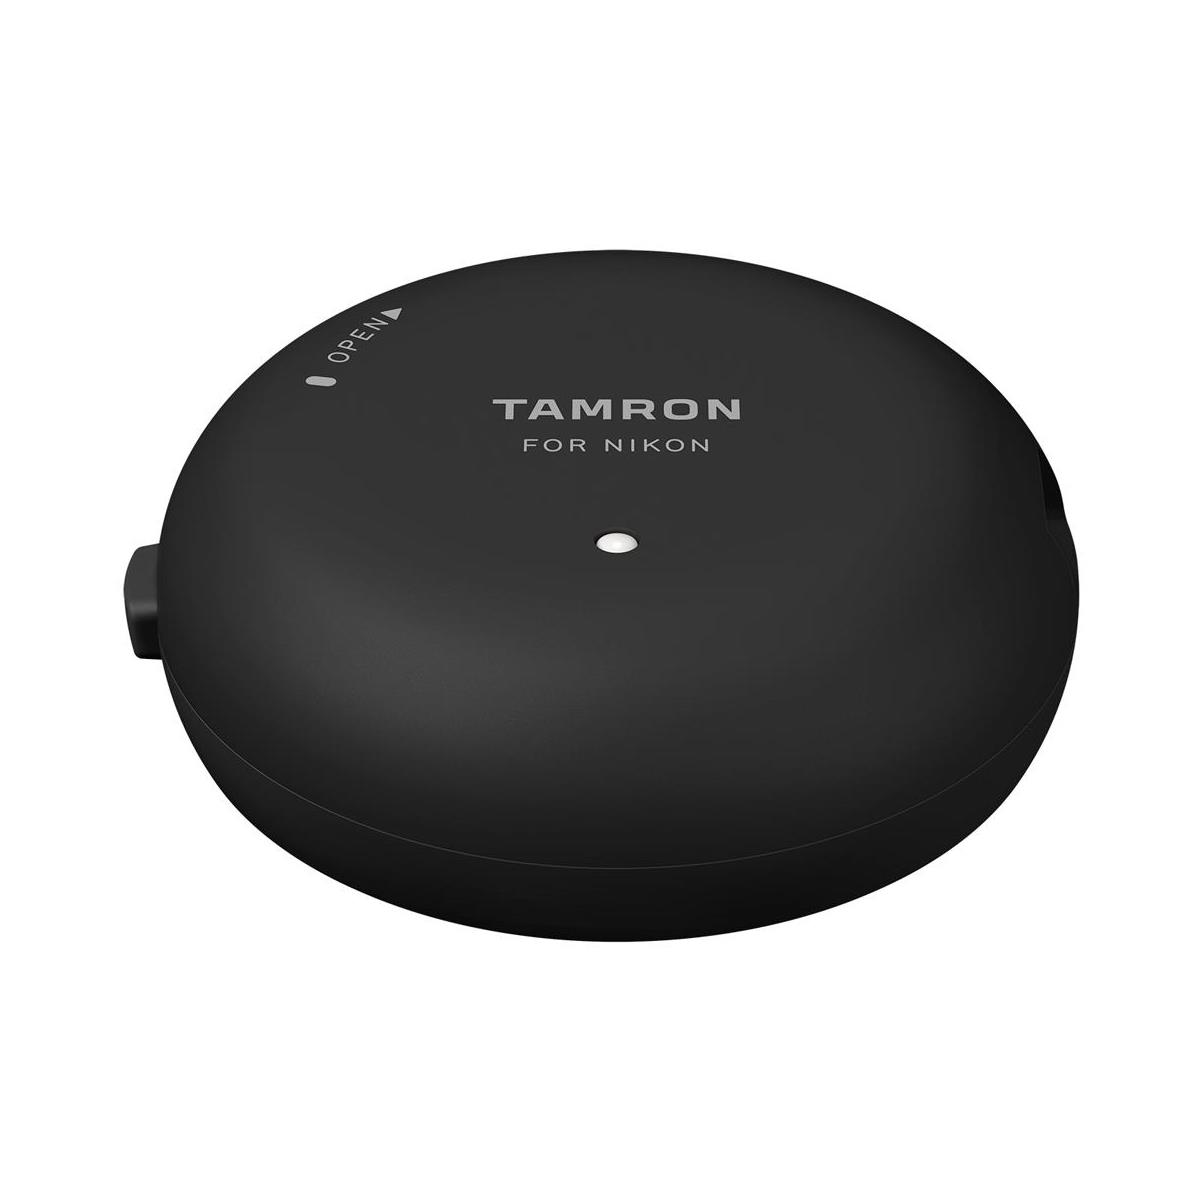 Image of Tamron TAP-In Console for Nikon F-Mount Lenses